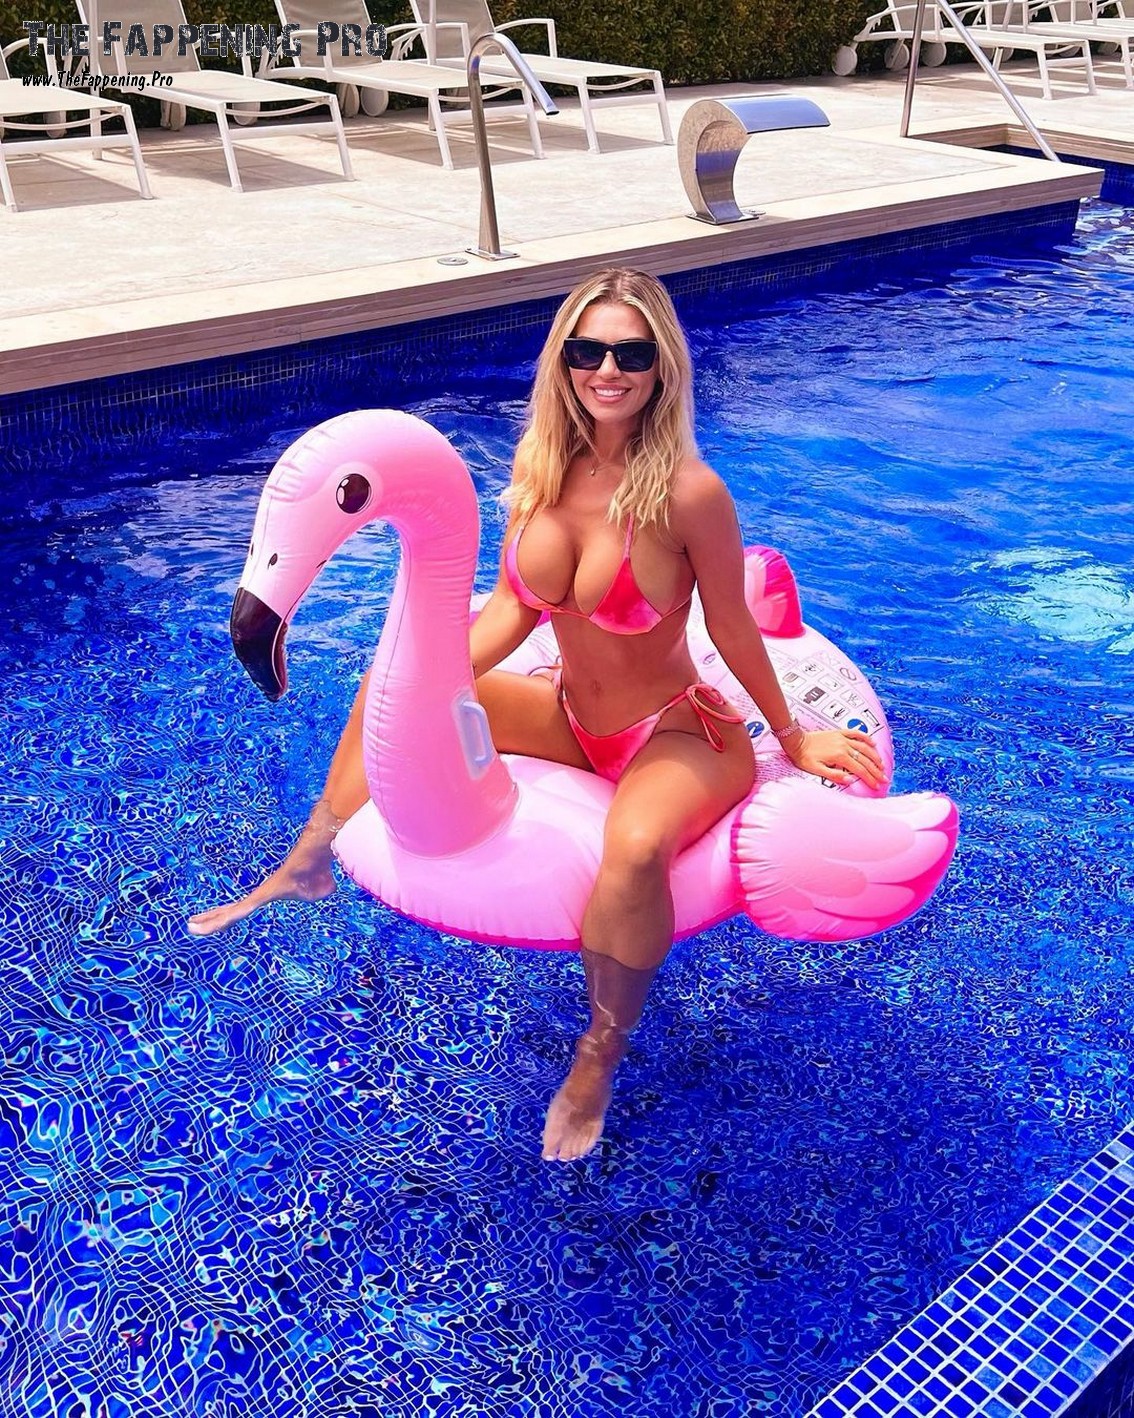 Christine McGuinness Sexy TheFappening.Pro 3 - Christine McGuinness Sexy In Bikini (3 Photos)